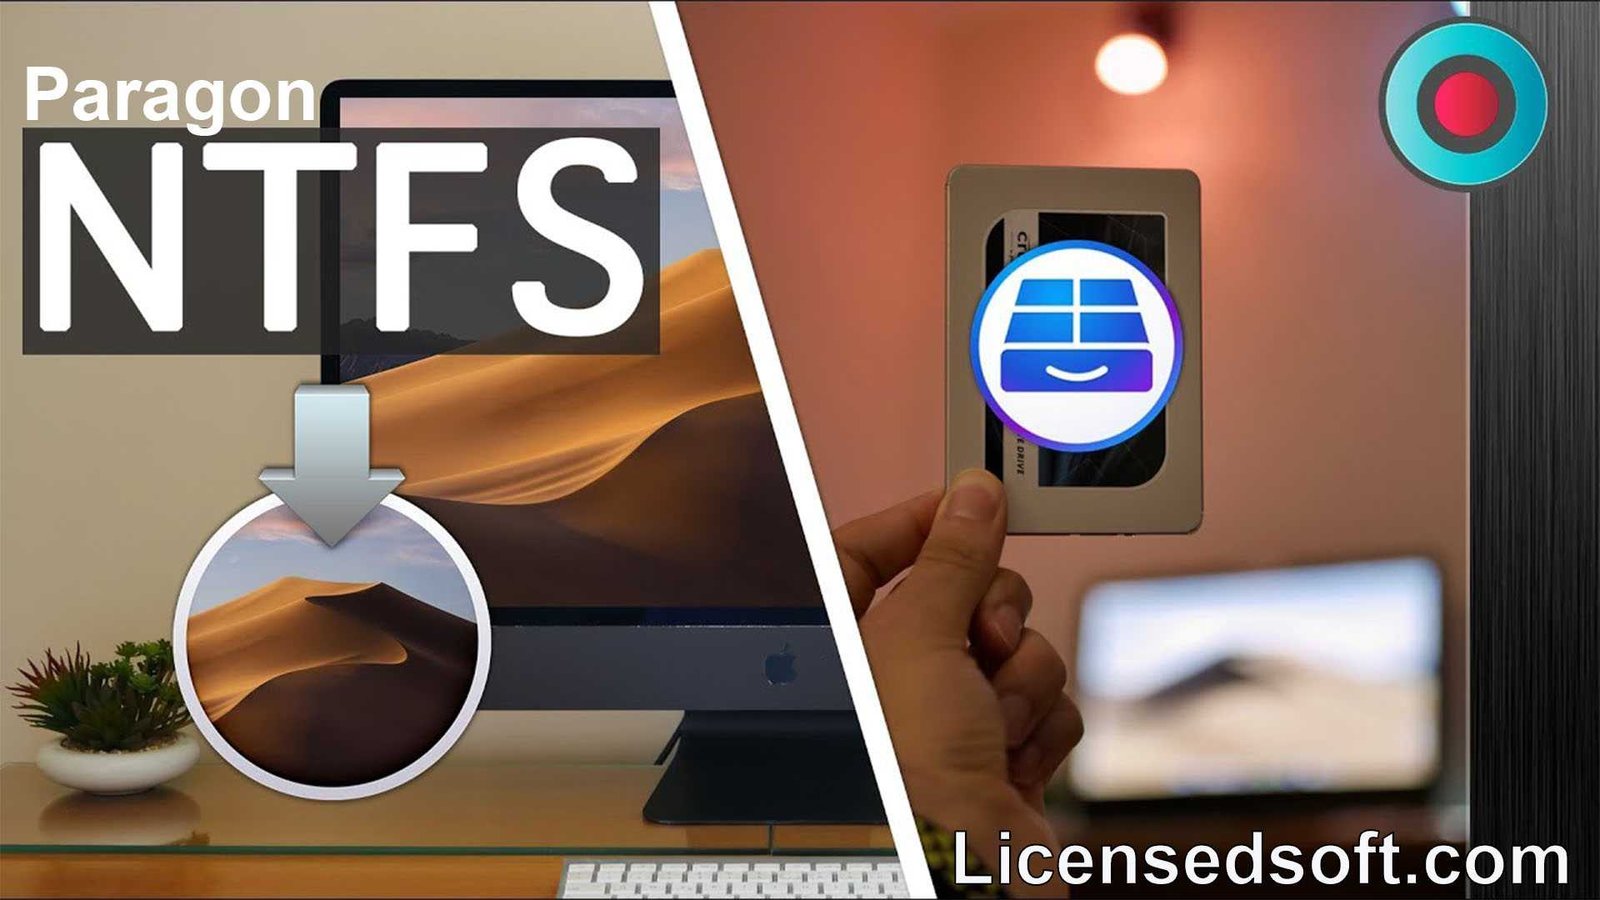 Paragon NTFS for Mac 15.5.106 Lifetime Premium cover photo by licensedsoft